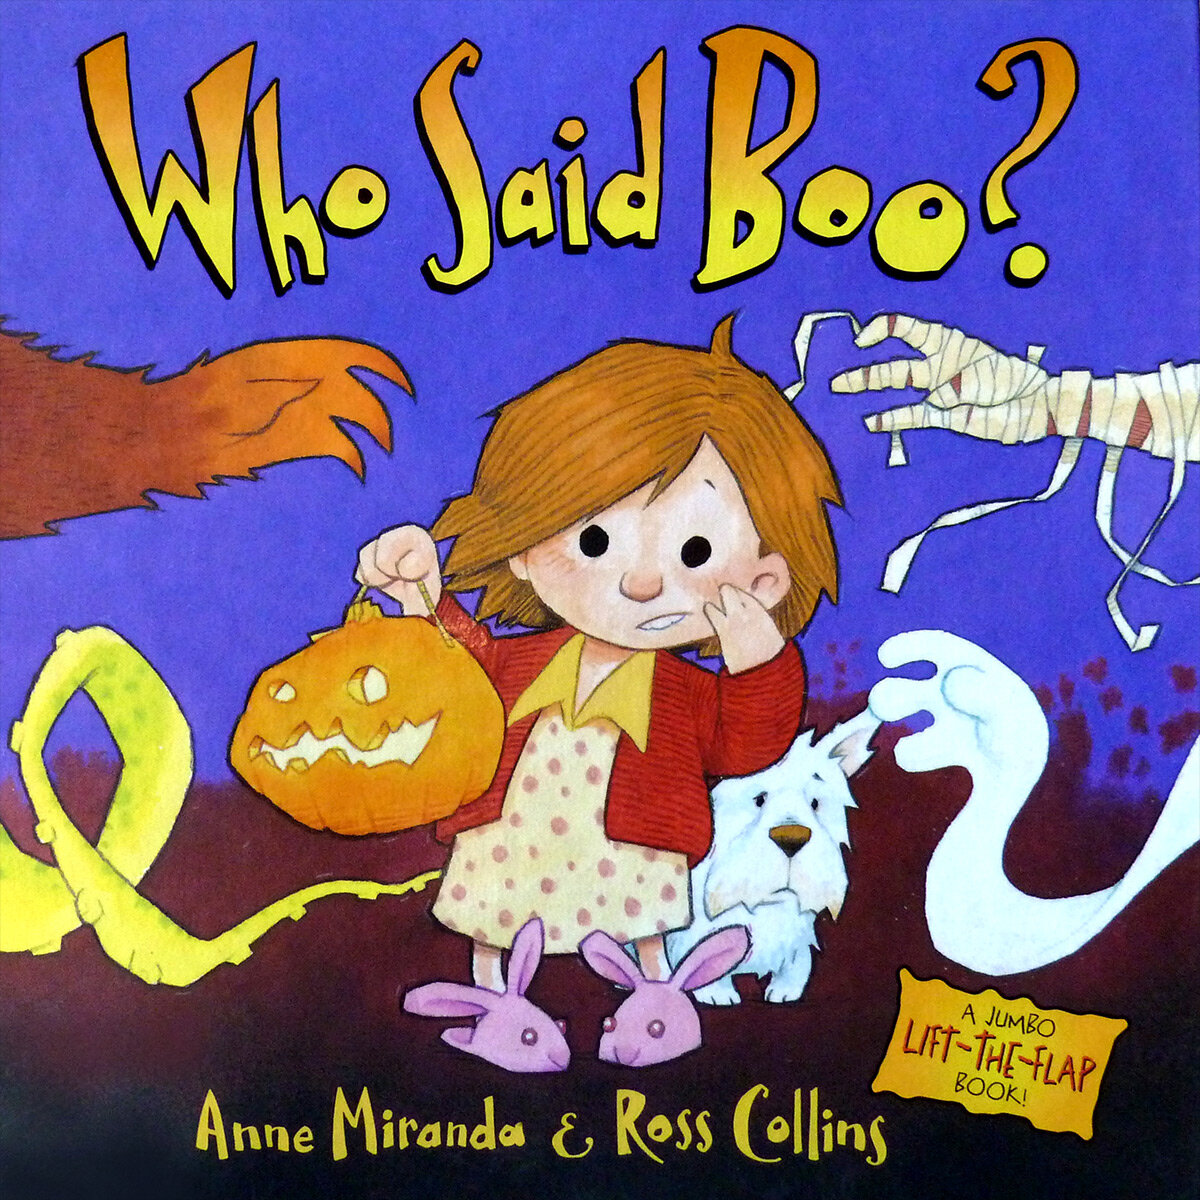 Who Said Boo illustrated by Ross Collins